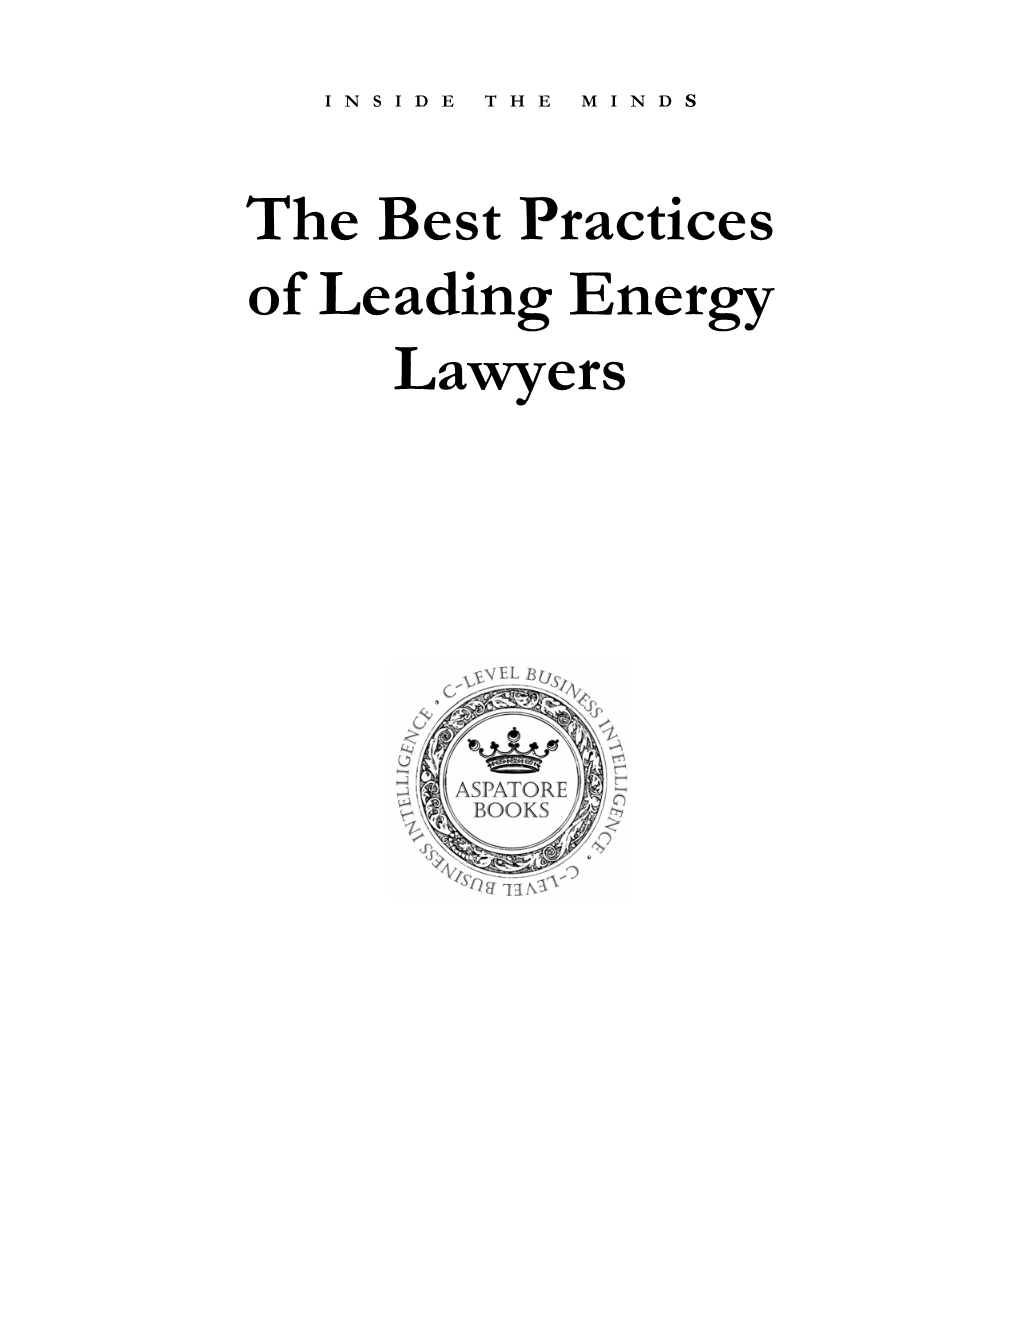 The Best Practices of Leading Energy Lawyers